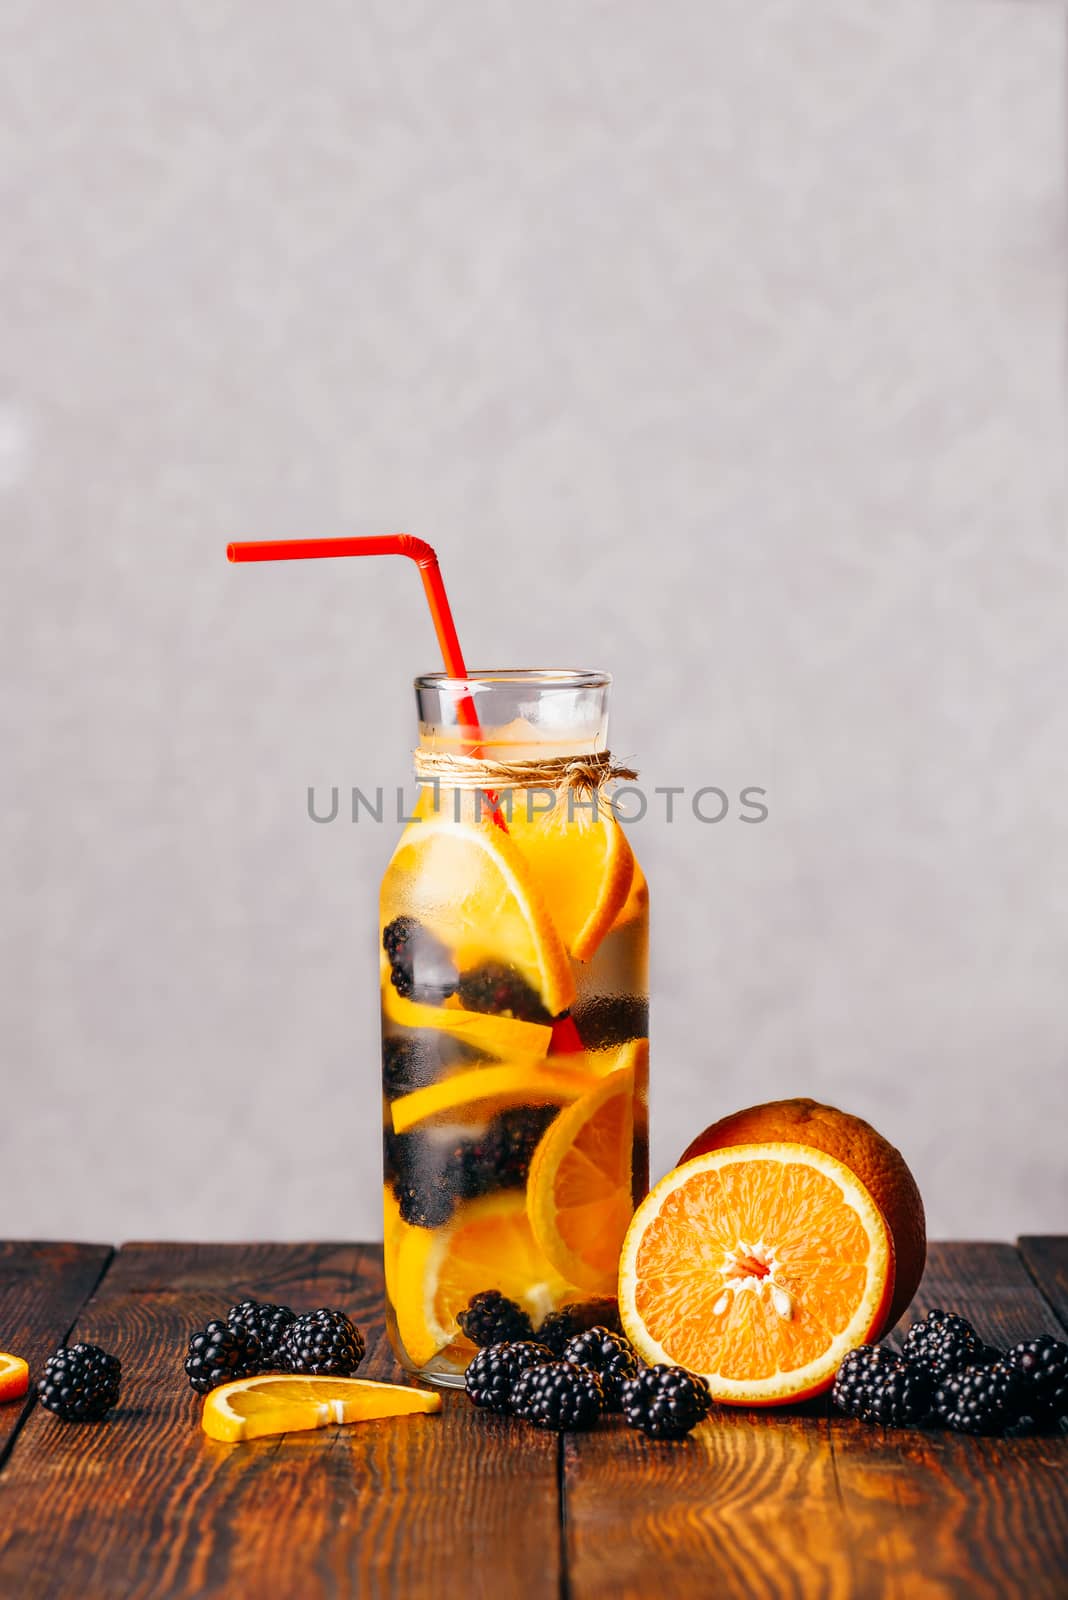 Red Straw in Bottle of Chilled Water Infused with Sliced Raw Orange and Fresh Blackberry. Ingredients on Wooden Table.